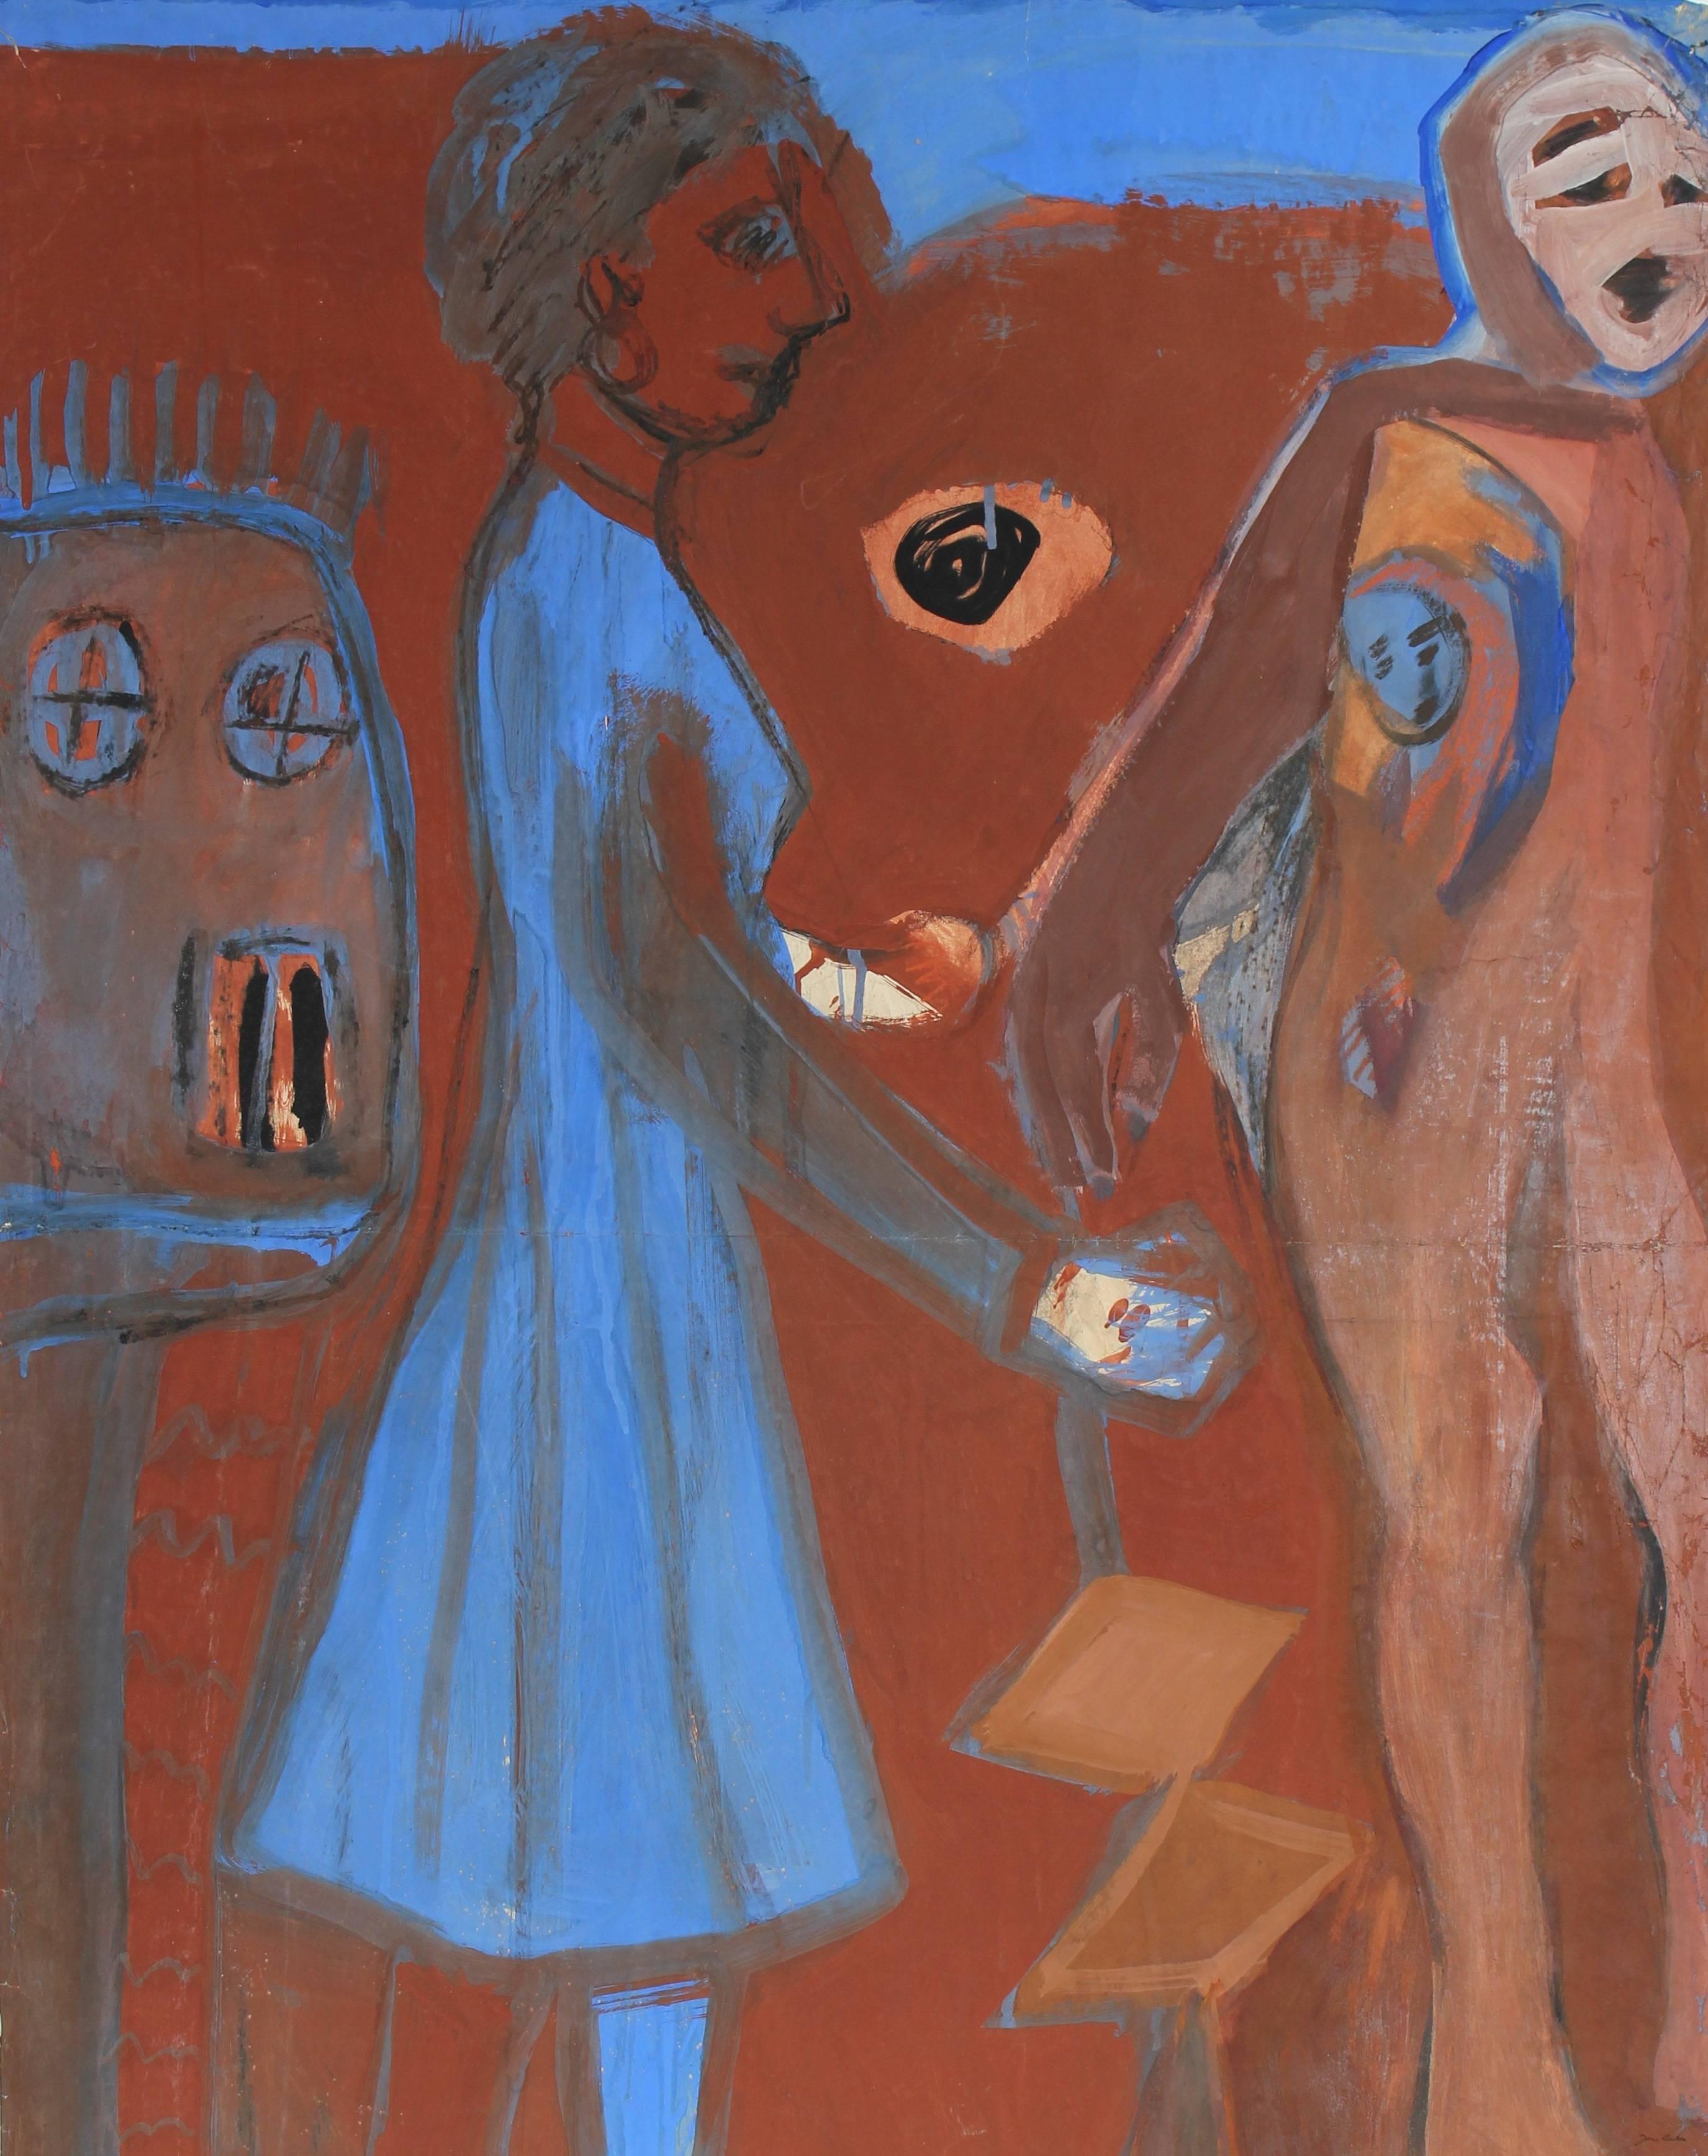 Jane Rades Figurative Painting - Expressionist Figures in Rust & Blue, Gouache on Paper, 20th Century